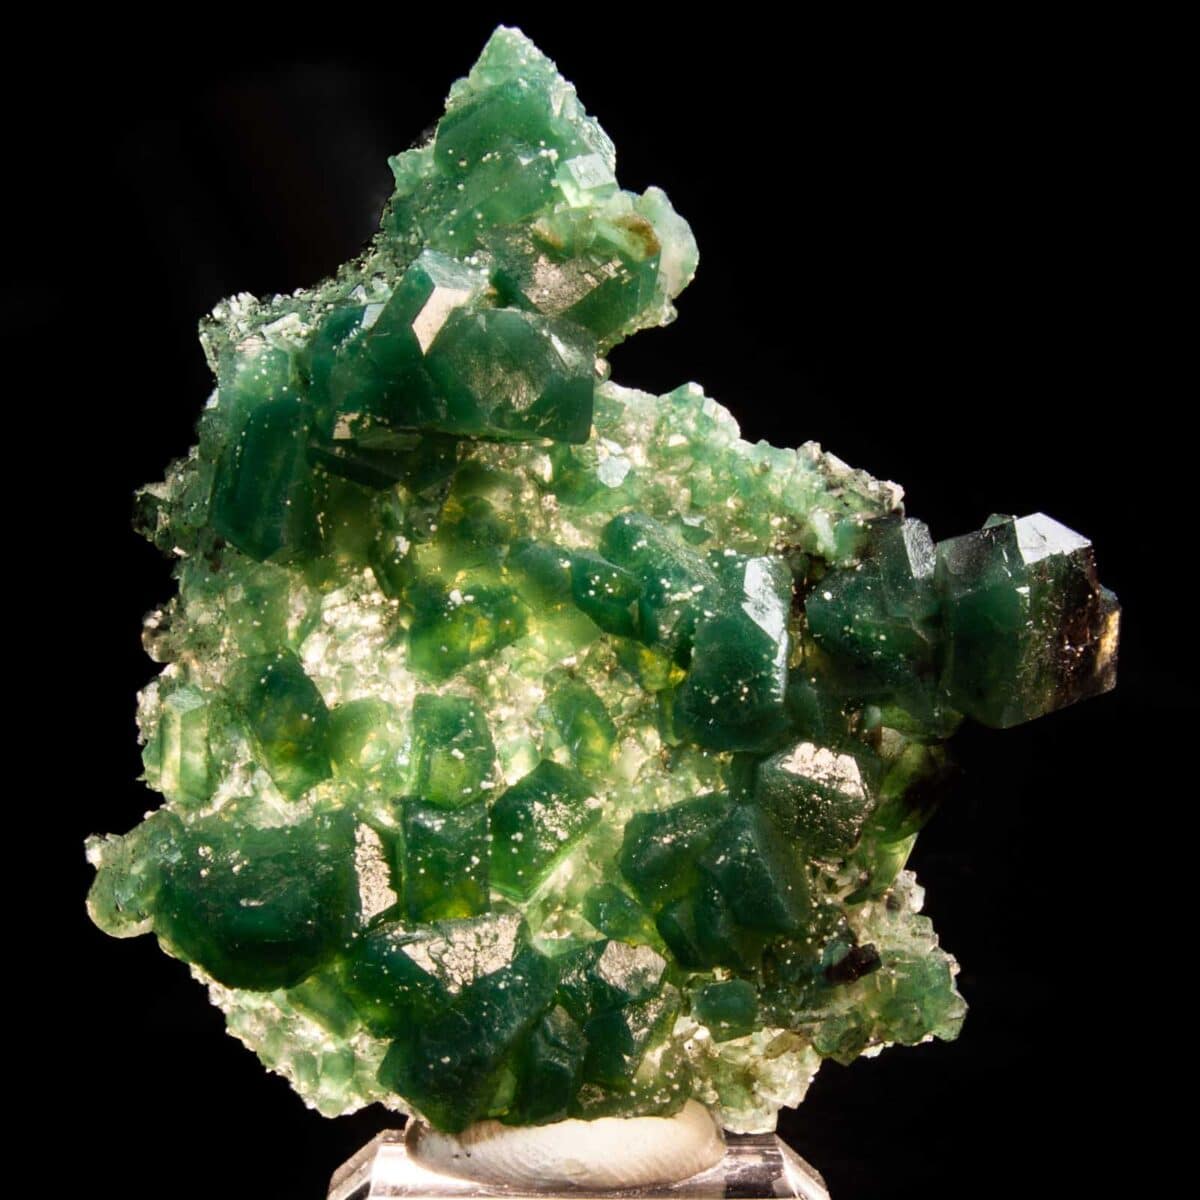 Apophyllite with Celadonite inclusions